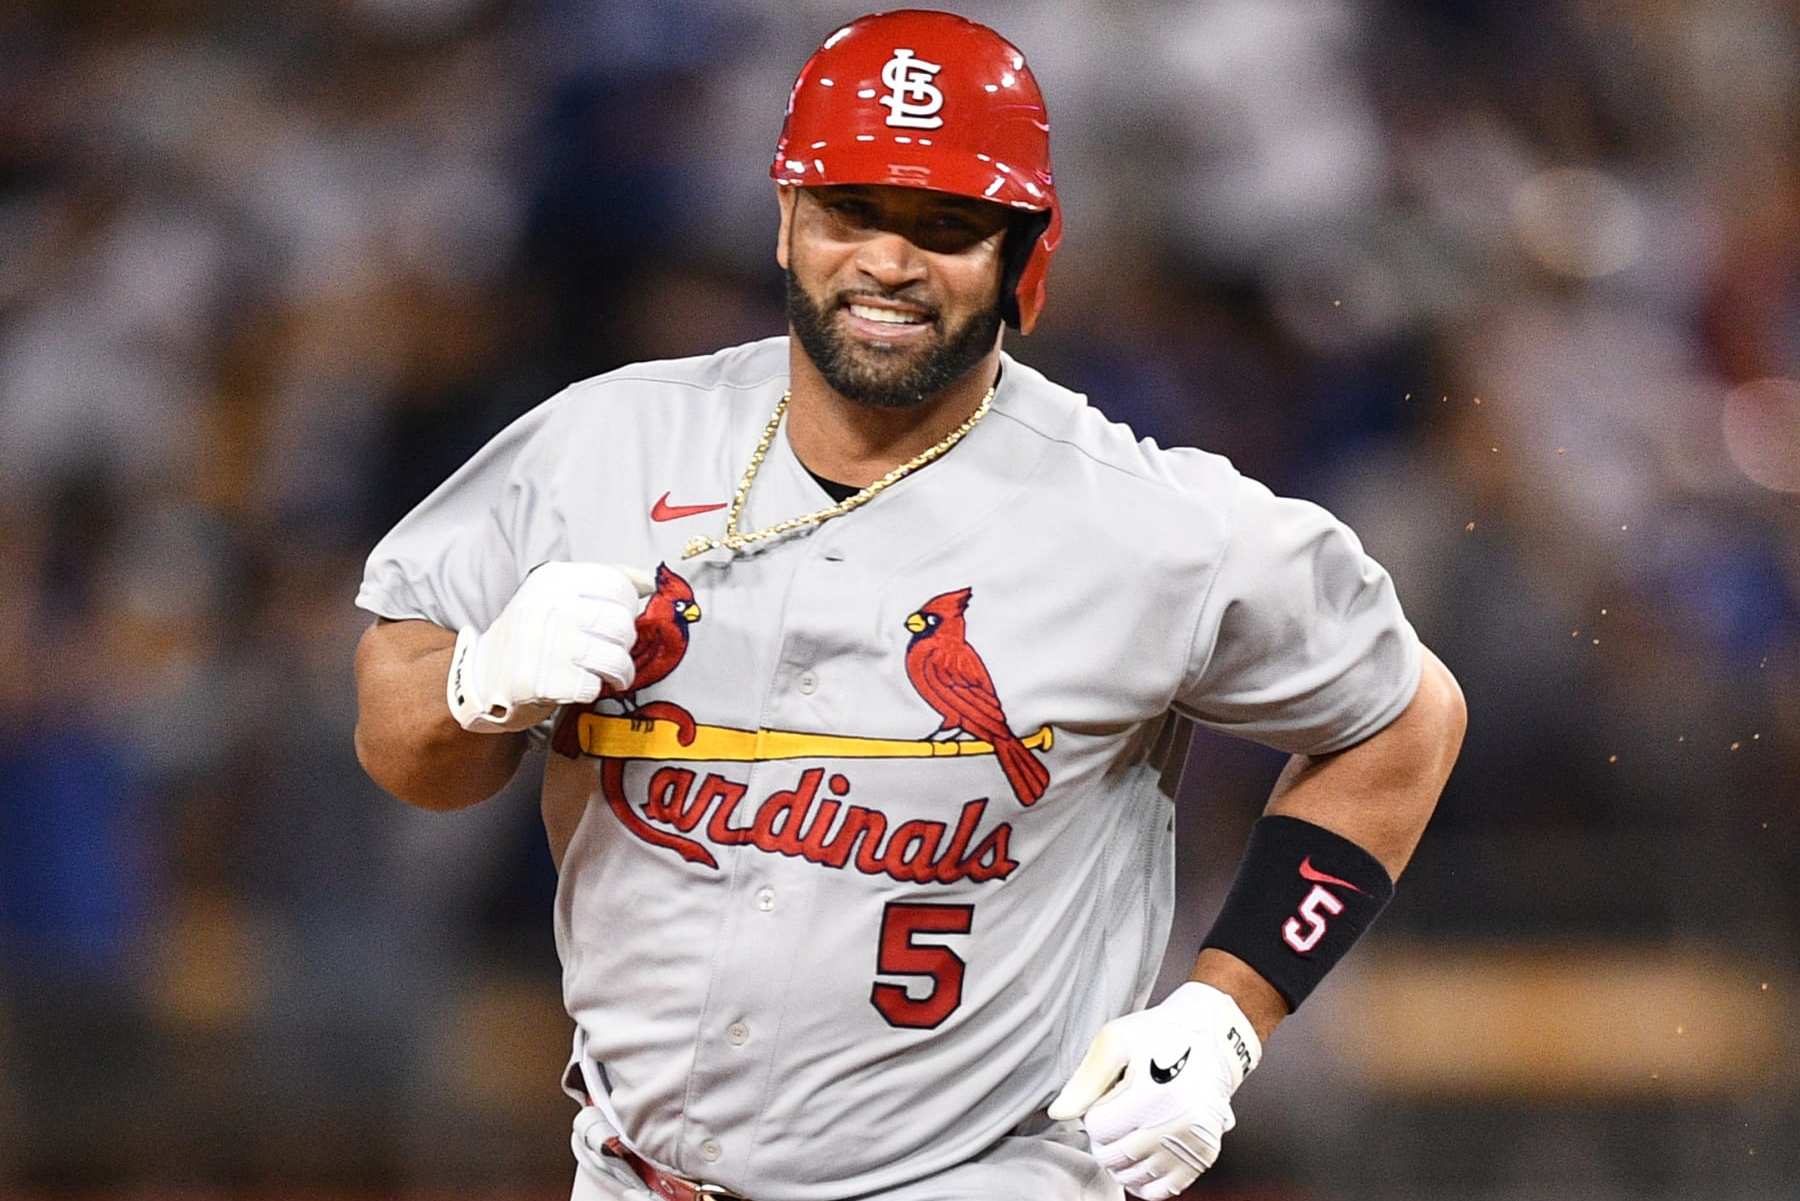 Albert Pujols on Reaching 700 HRs: 'It Was Always About Winning